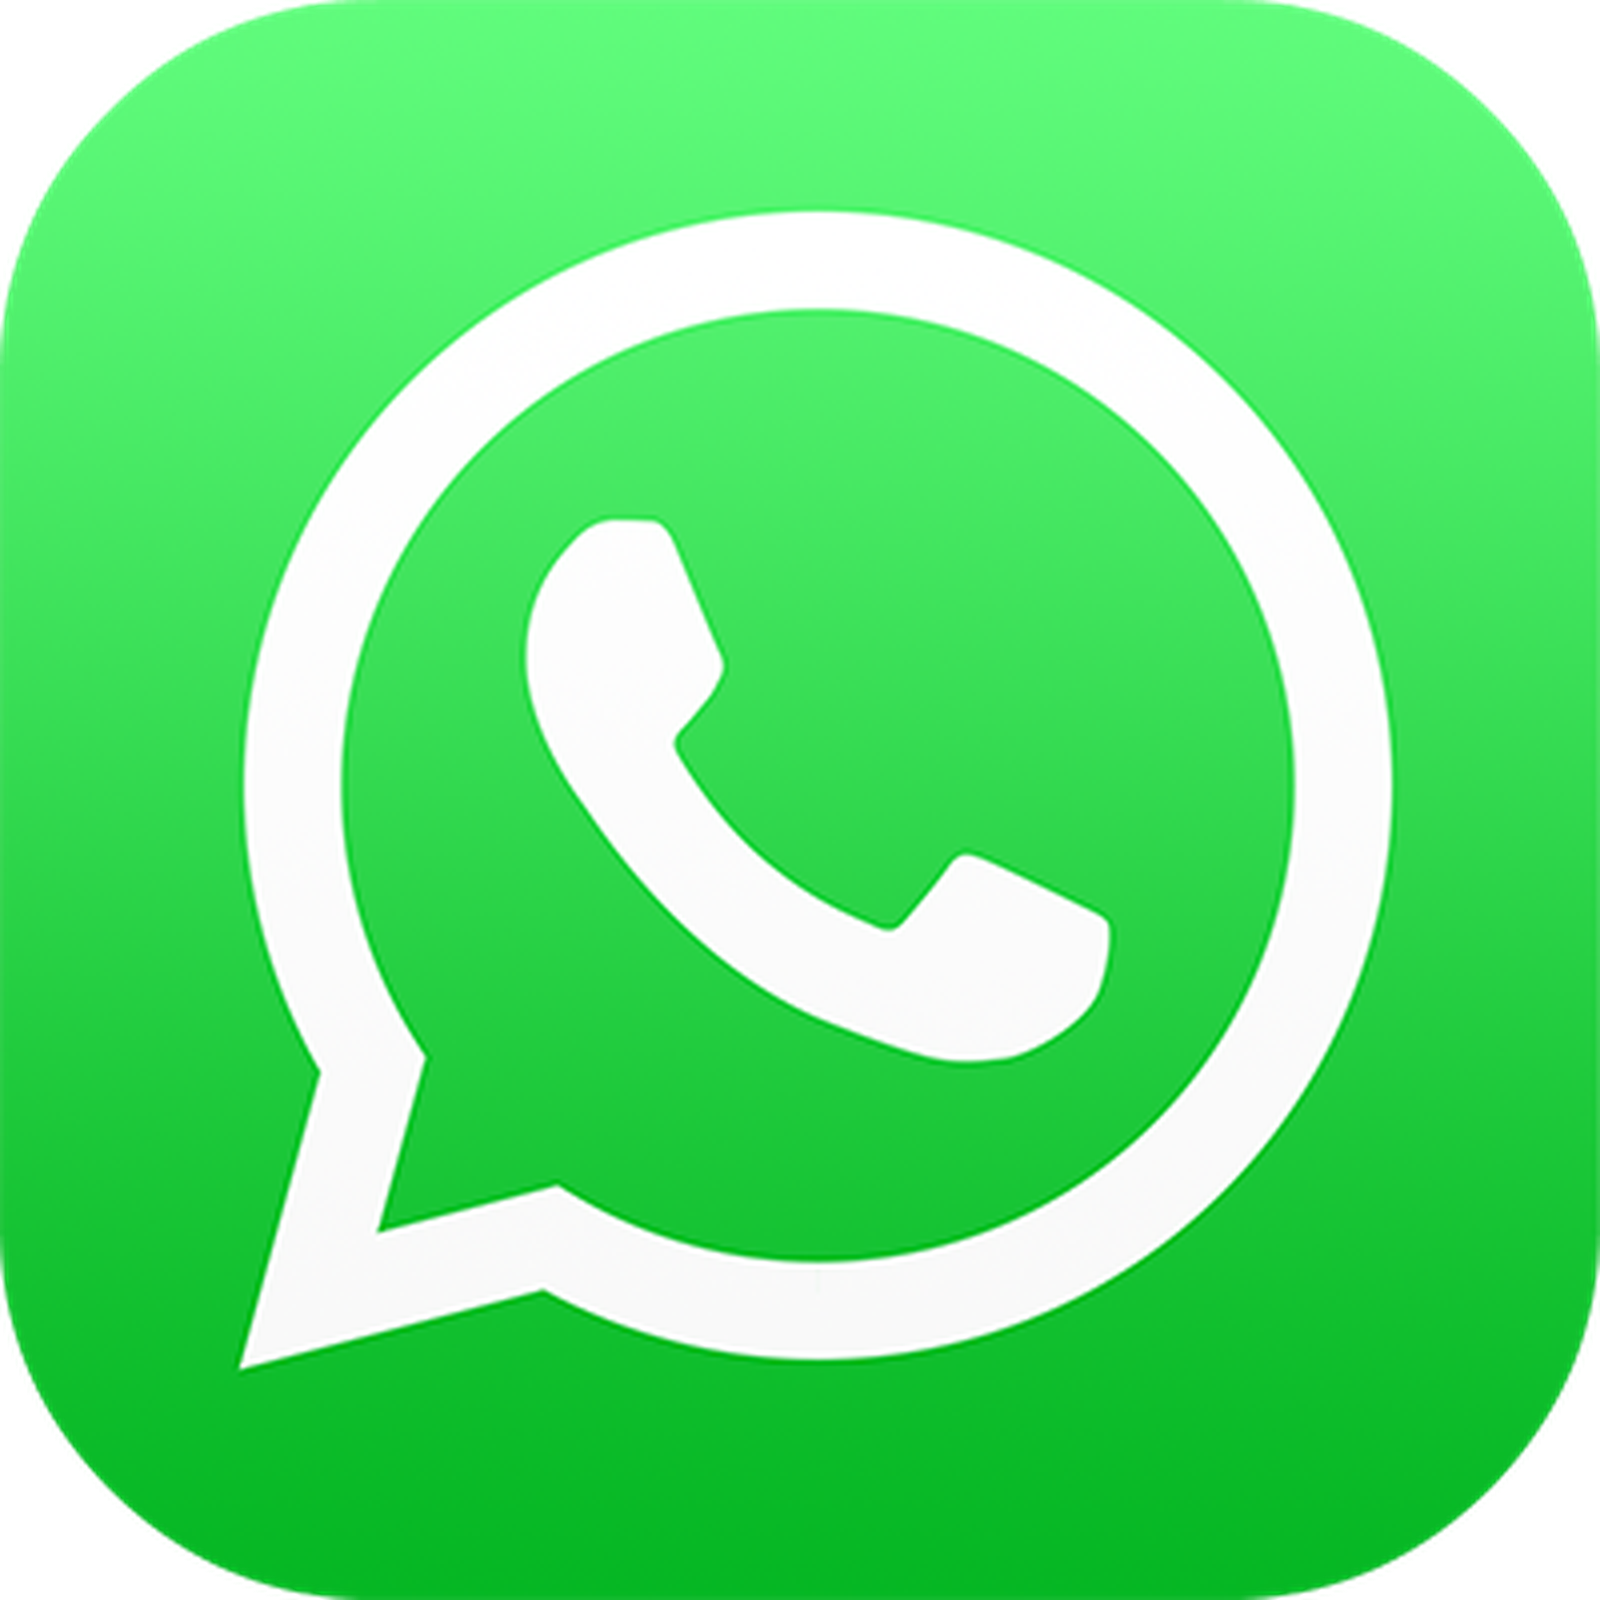 WhatsApp uses status updates to remind users of its privacy commitments